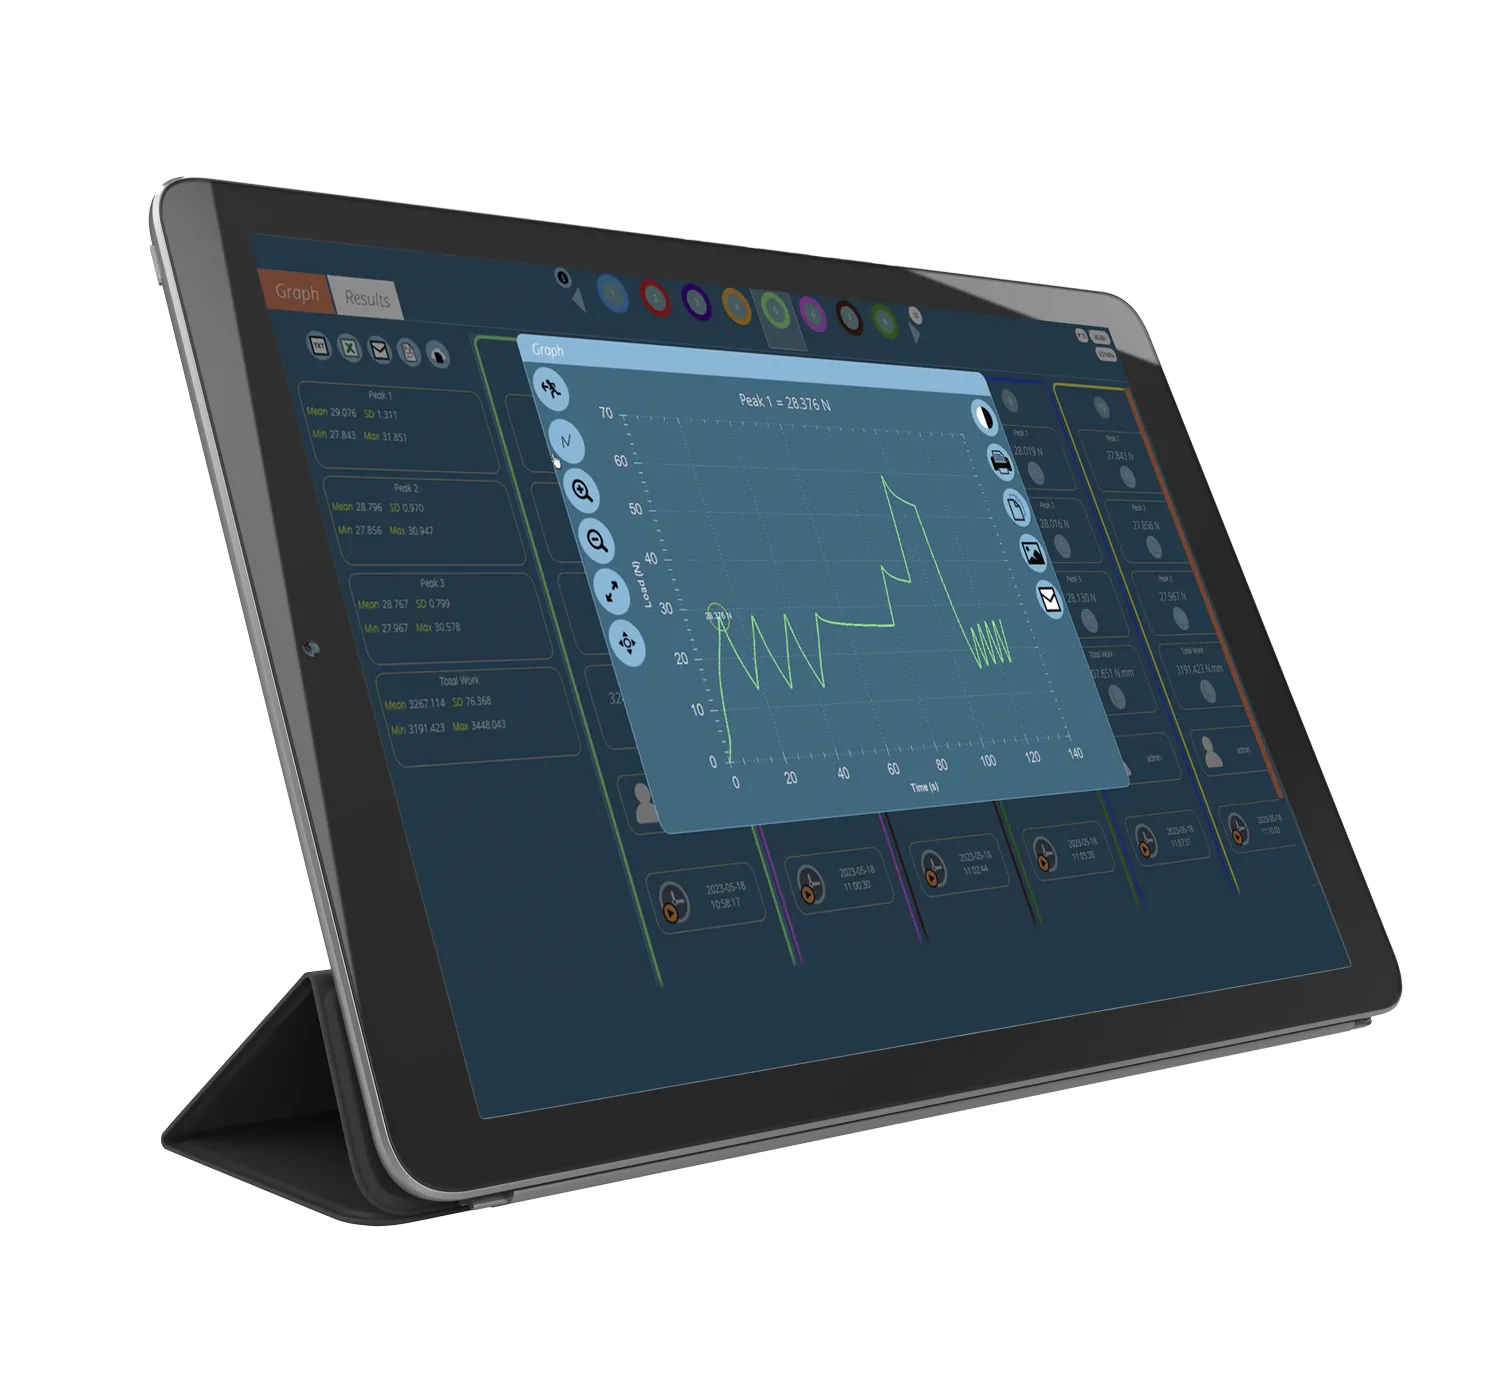 VectorPro force testing software test screen loaded on a touchscreen tablet